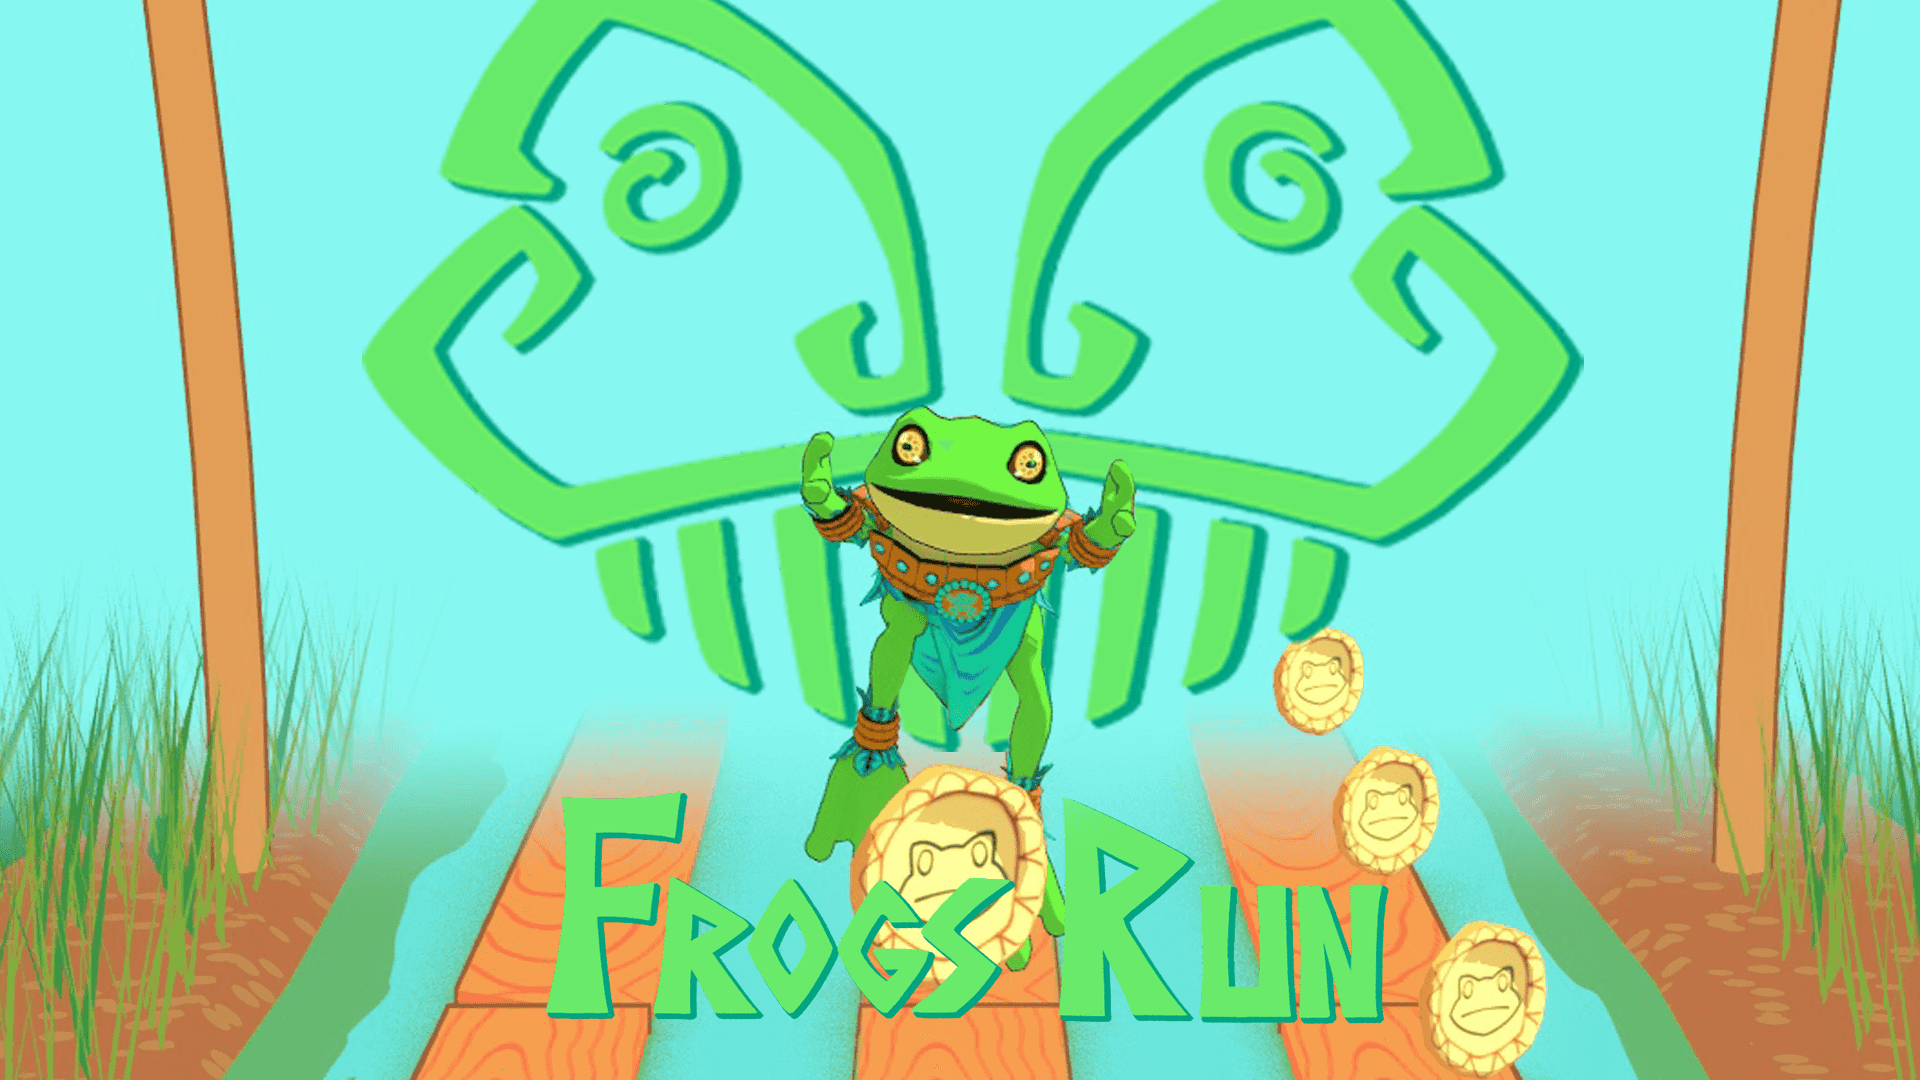 Frogs Run: Free-to-Play NFT Runner Game on BNB Chain